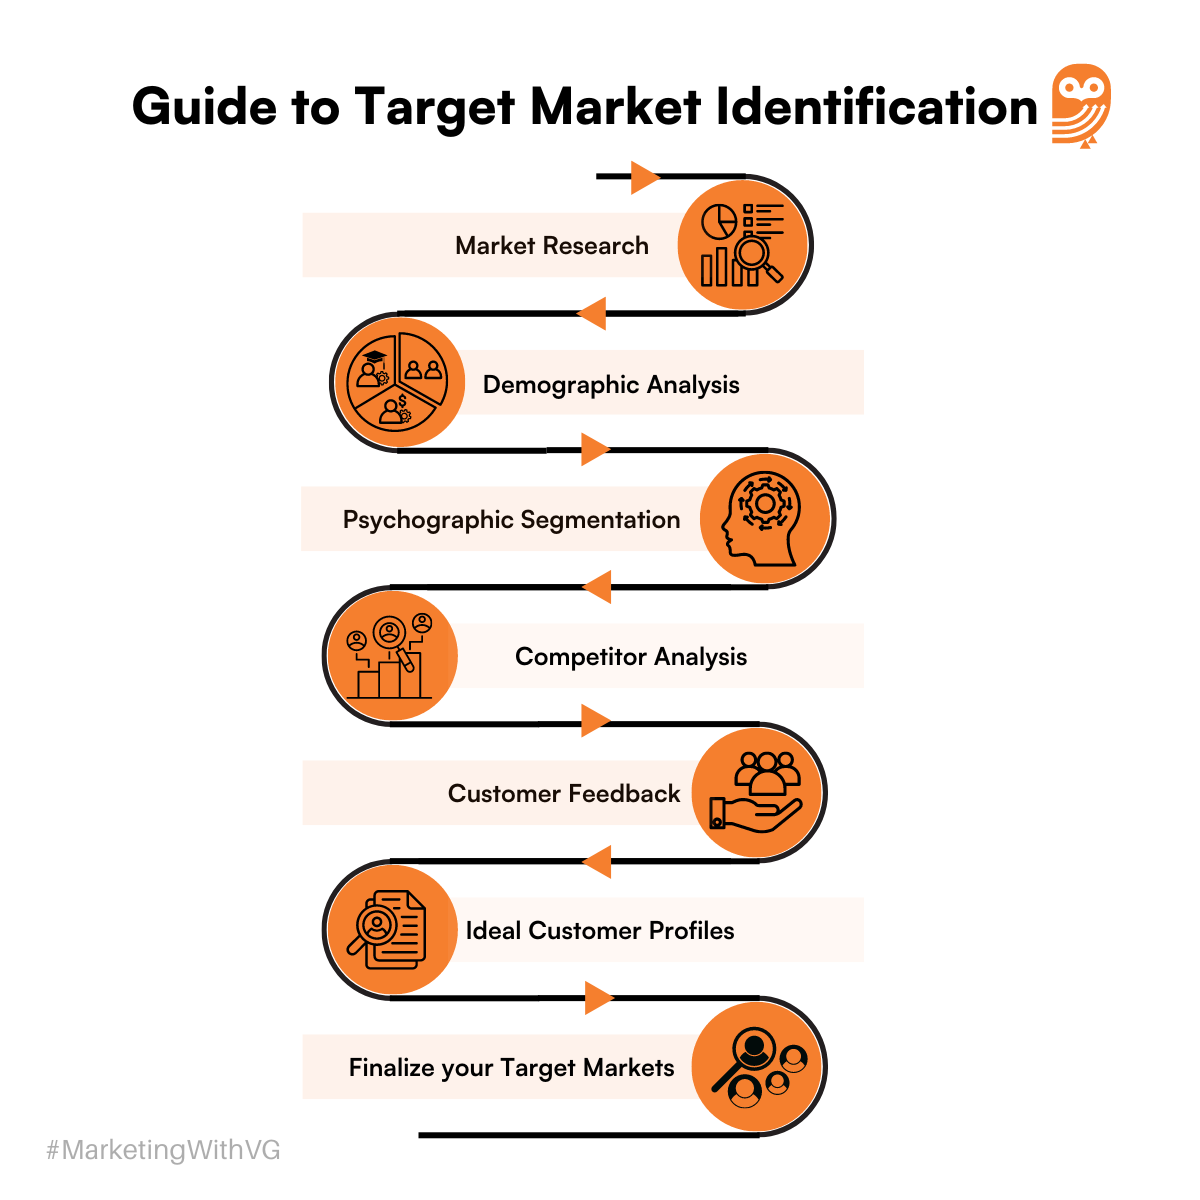 GTM: Guide to Target Market Identification